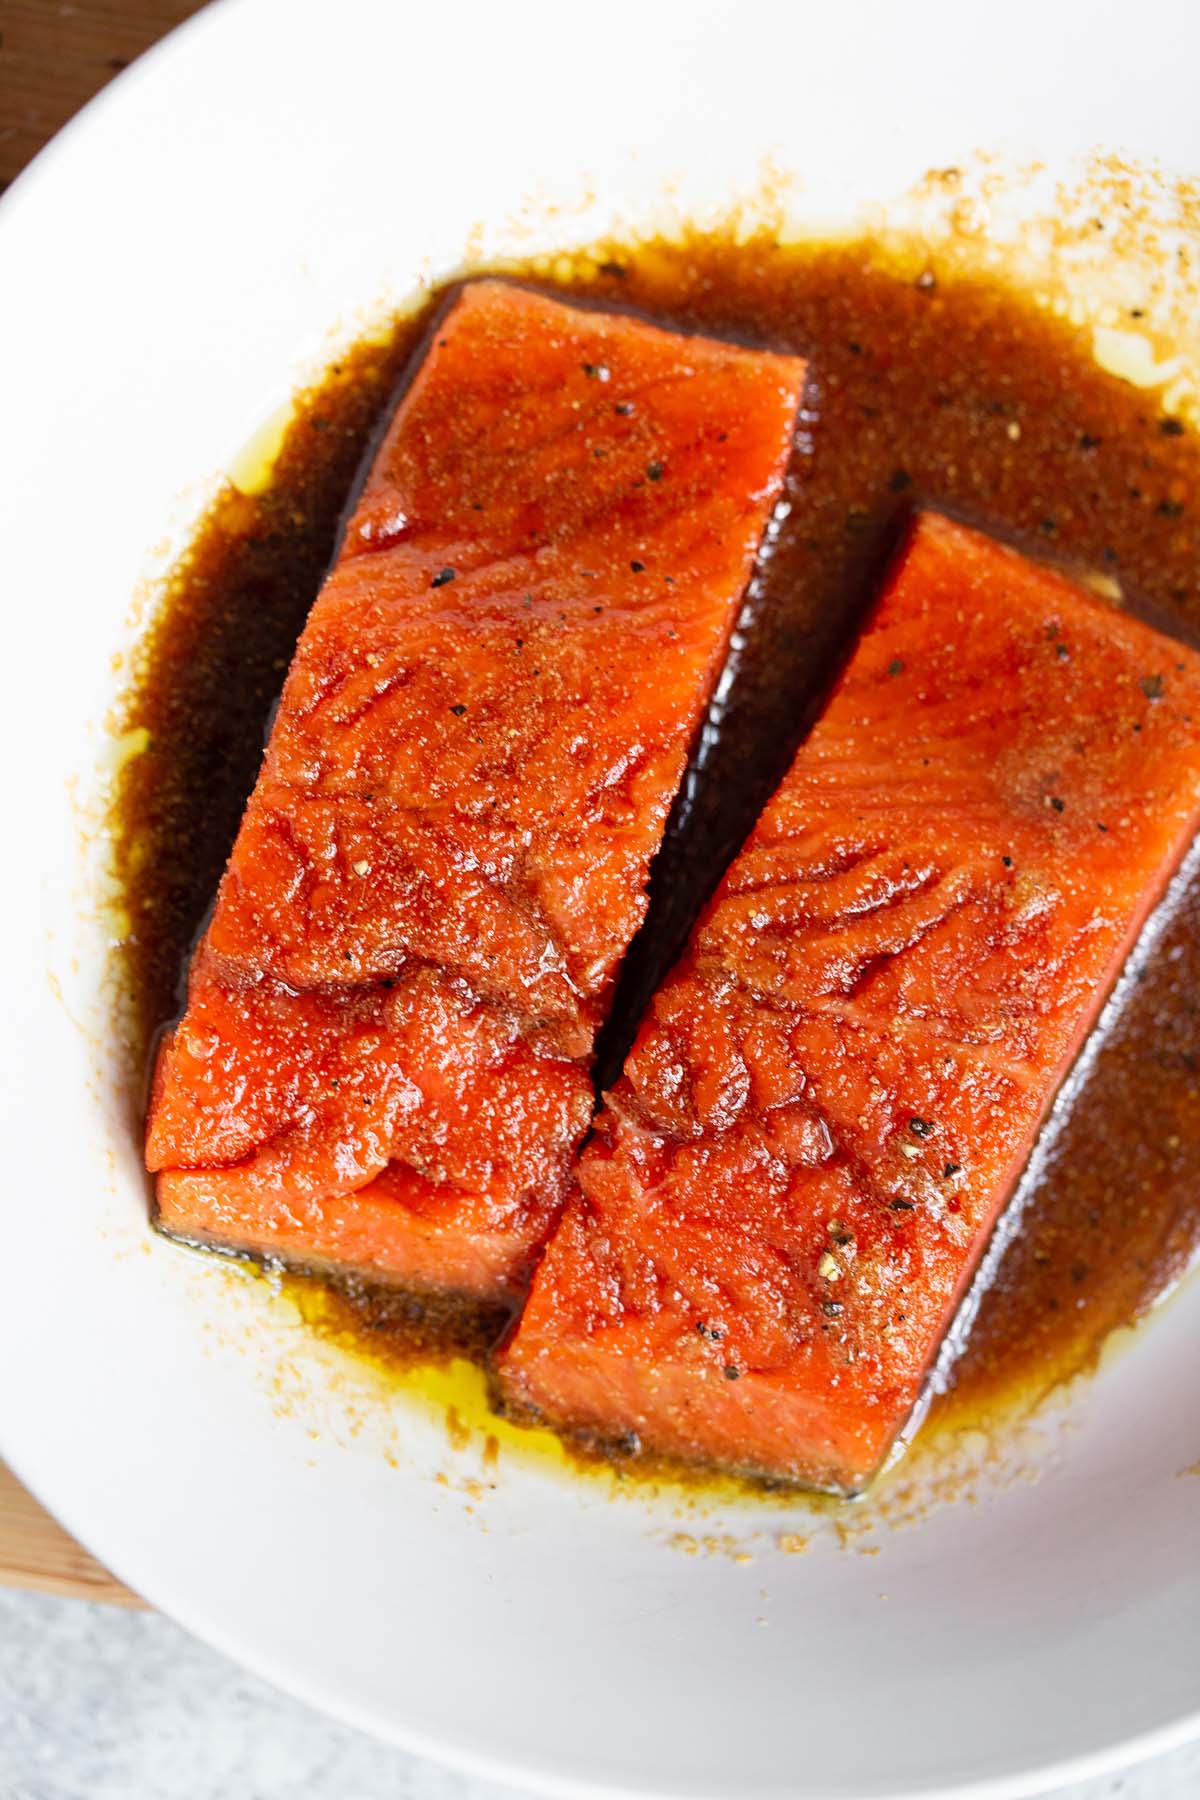 Two salmon pieces in marinade.